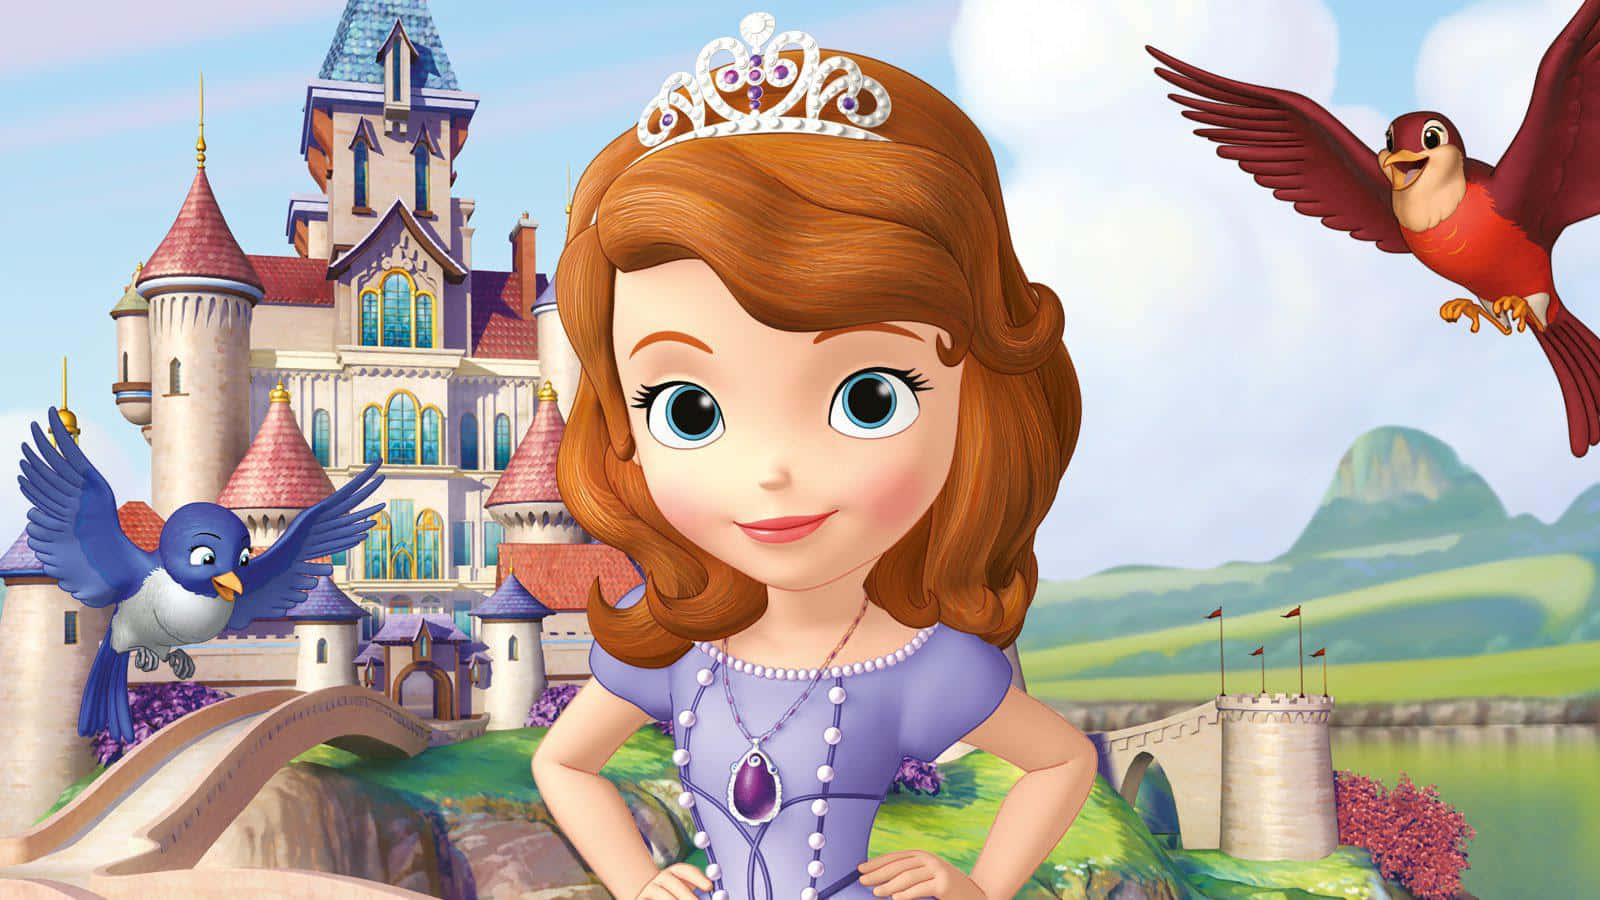 Wishful Thinking: Princess Sofia Lives Happily Ever After